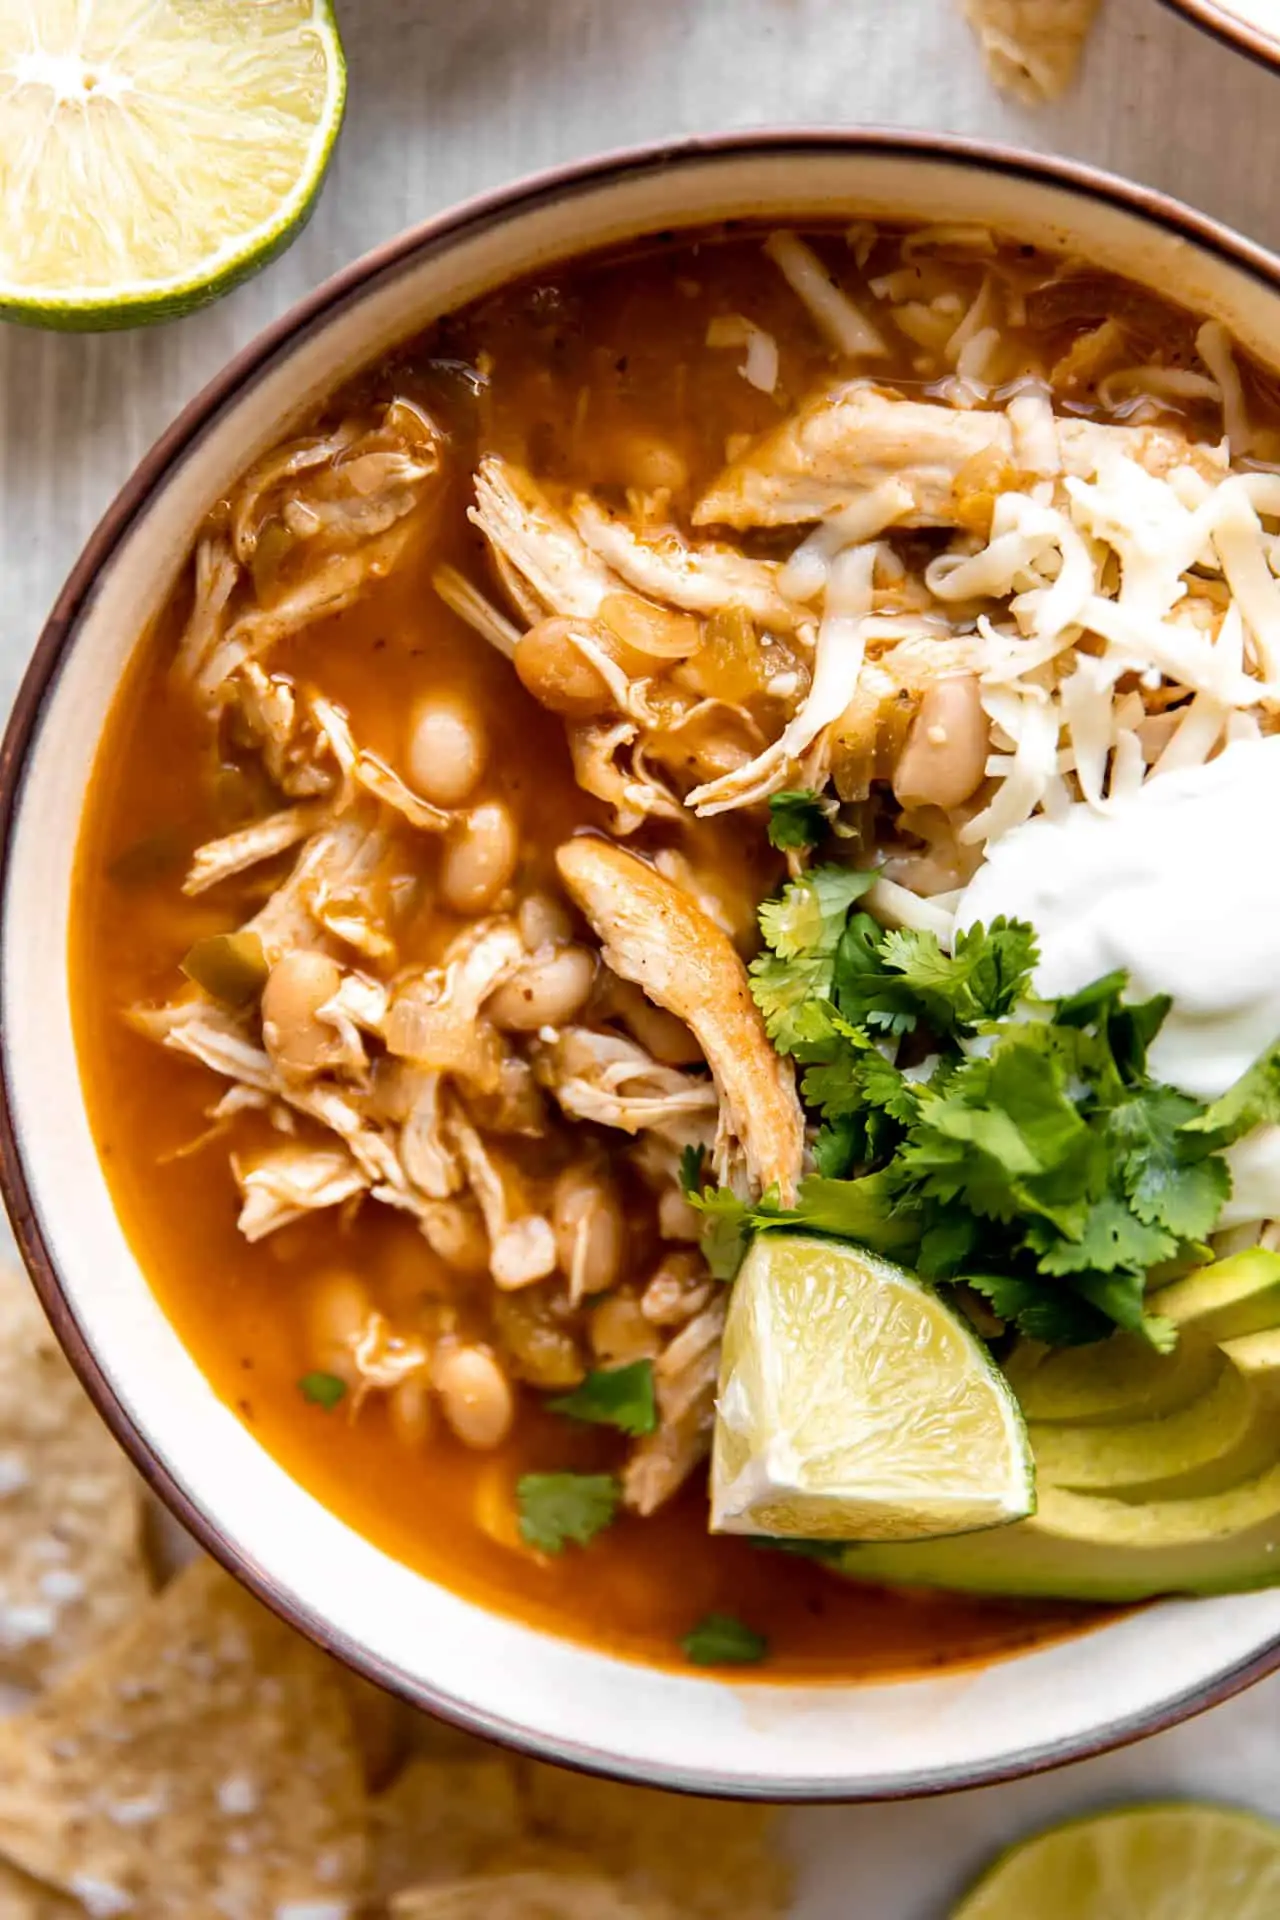 Up close view of chicken chili with toppings of sour cream, cheese, cilantro and avocado.